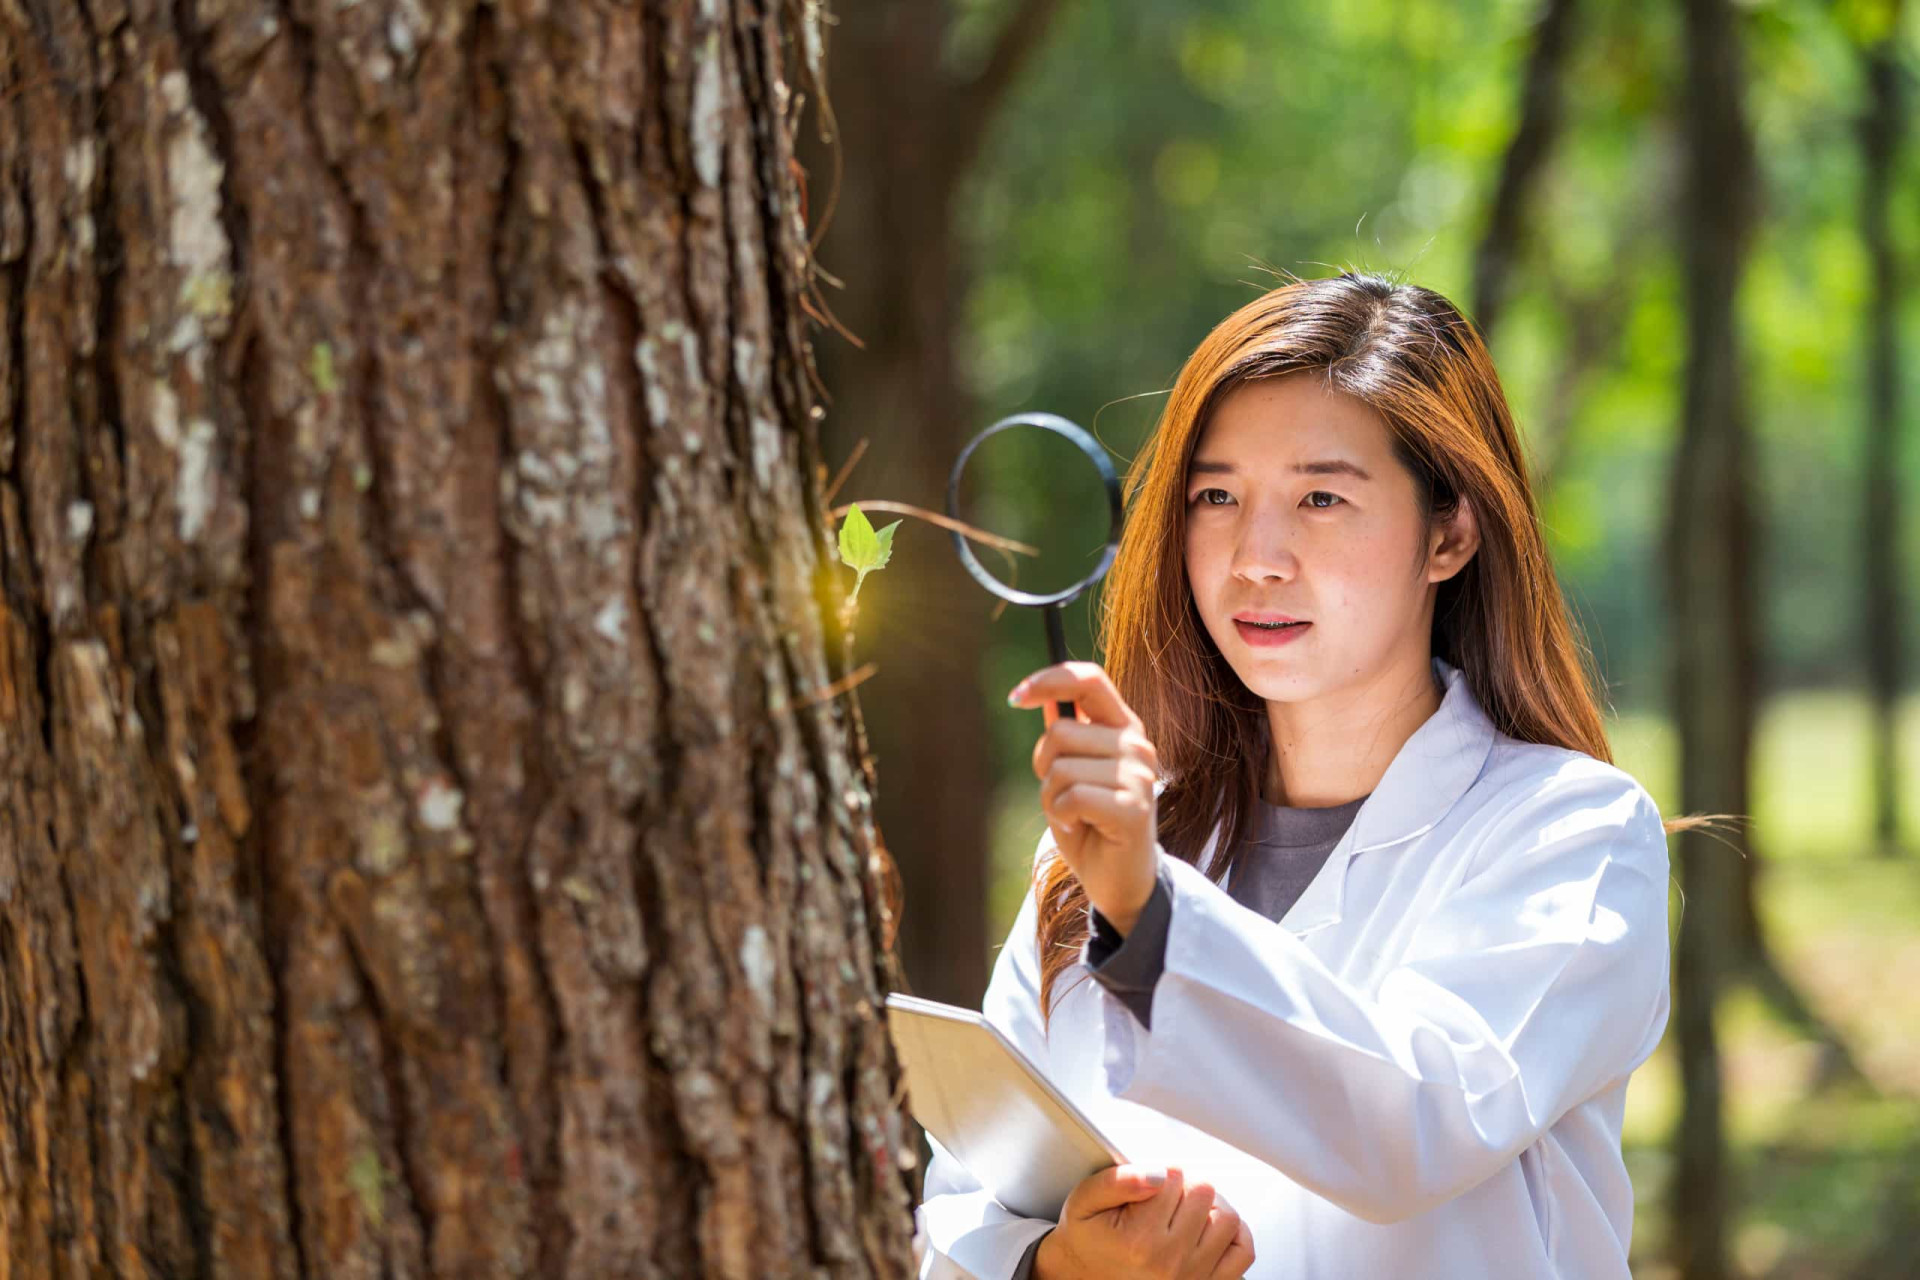 <p>While some work requires lab time, pursuing the science of plant life often takes you out into the field to research various categories of plant life, from the minutest cell to the mightiest tree.</p><p>You may also like:<a href="https://www.starsinsider.com/n/135007?utm_source=msn.com&utm_medium=display&utm_campaign=referral_description&utm_content=434684v2en-us"> The real impact of alcohol in your body</a></p>